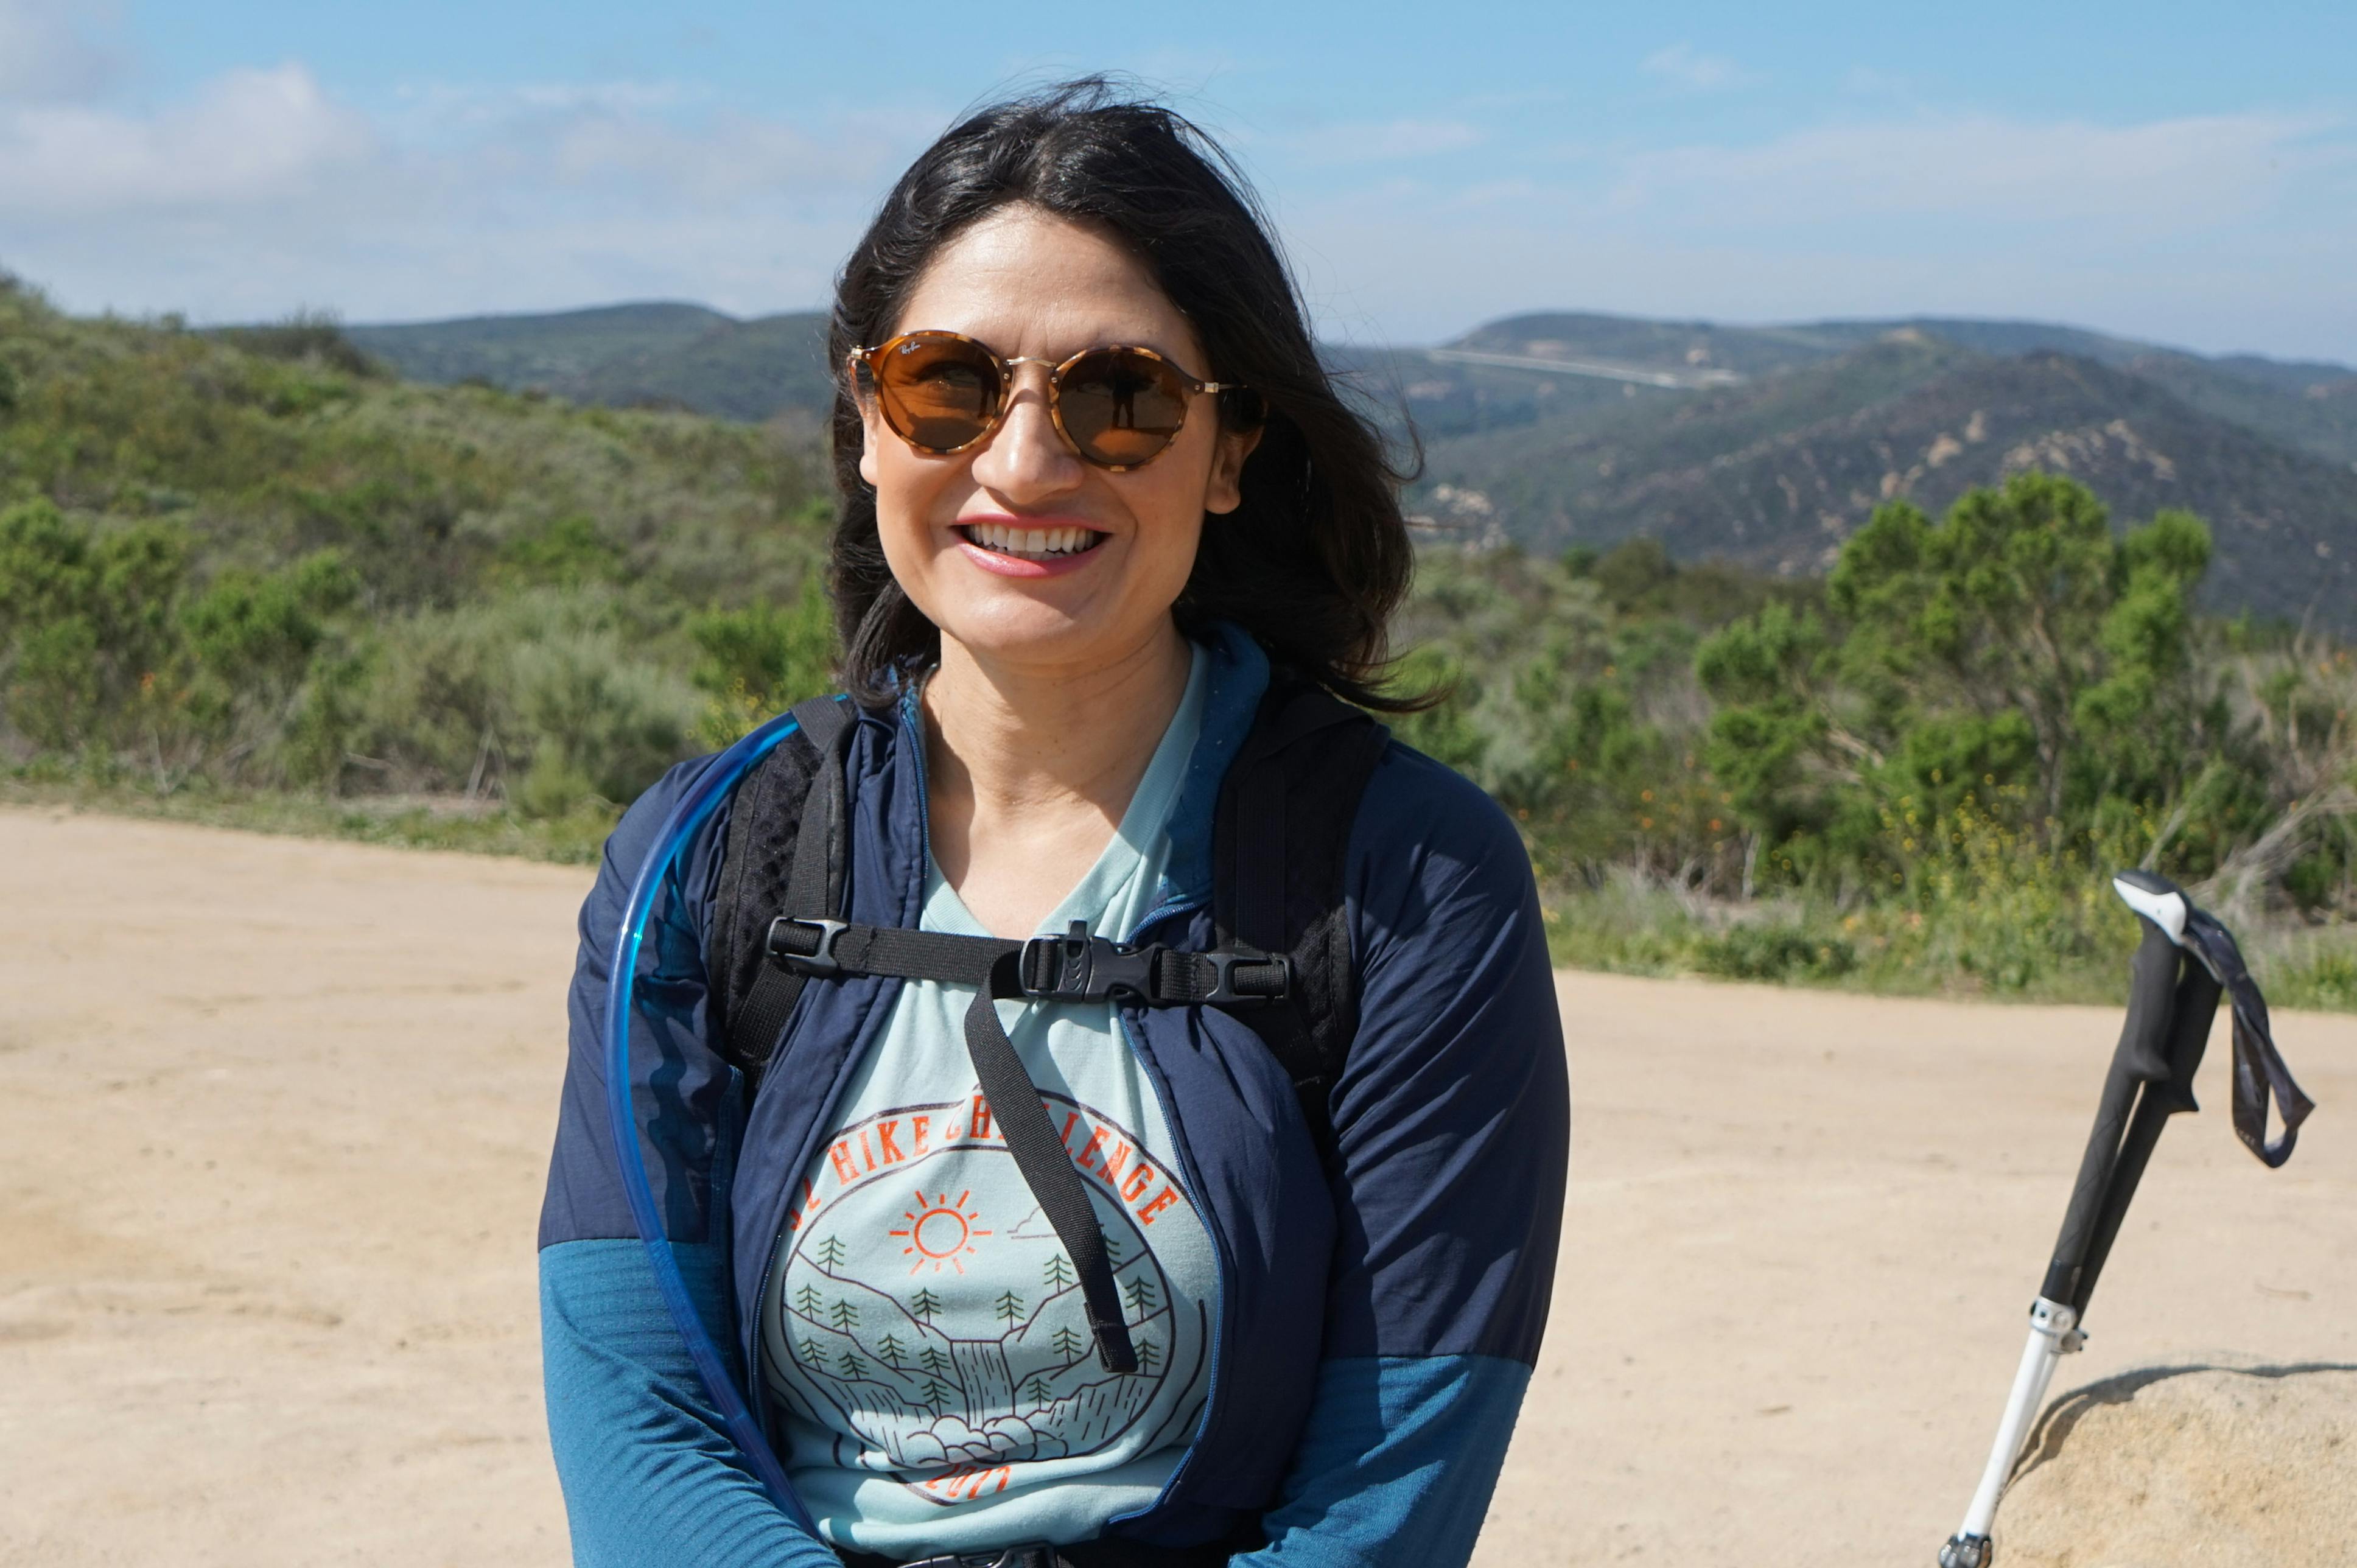 Karla Amador smiling while on a hike in the mountains with some trekking poles.